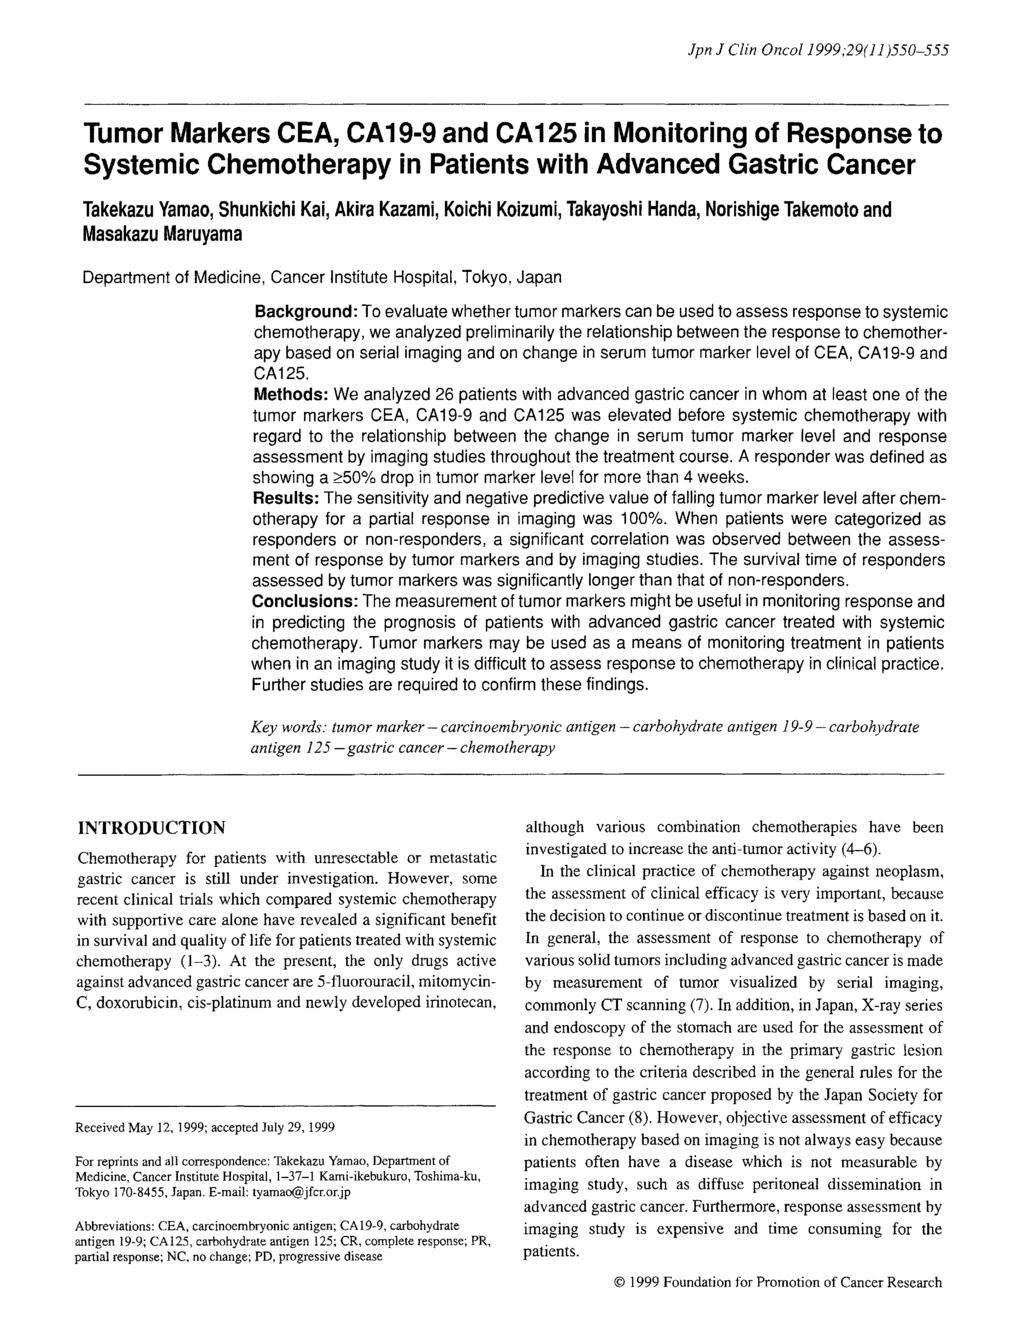 Jpn J Clin OncoI1999;29(11)550-555 Tumor Markers CEA, CA19-9 and CA125 in Monitoring of Response to Systemic Chemotherapy in Patients with Advanced Gastric Cancer Takekazu Yamao, Shunkichi Kai, Akira